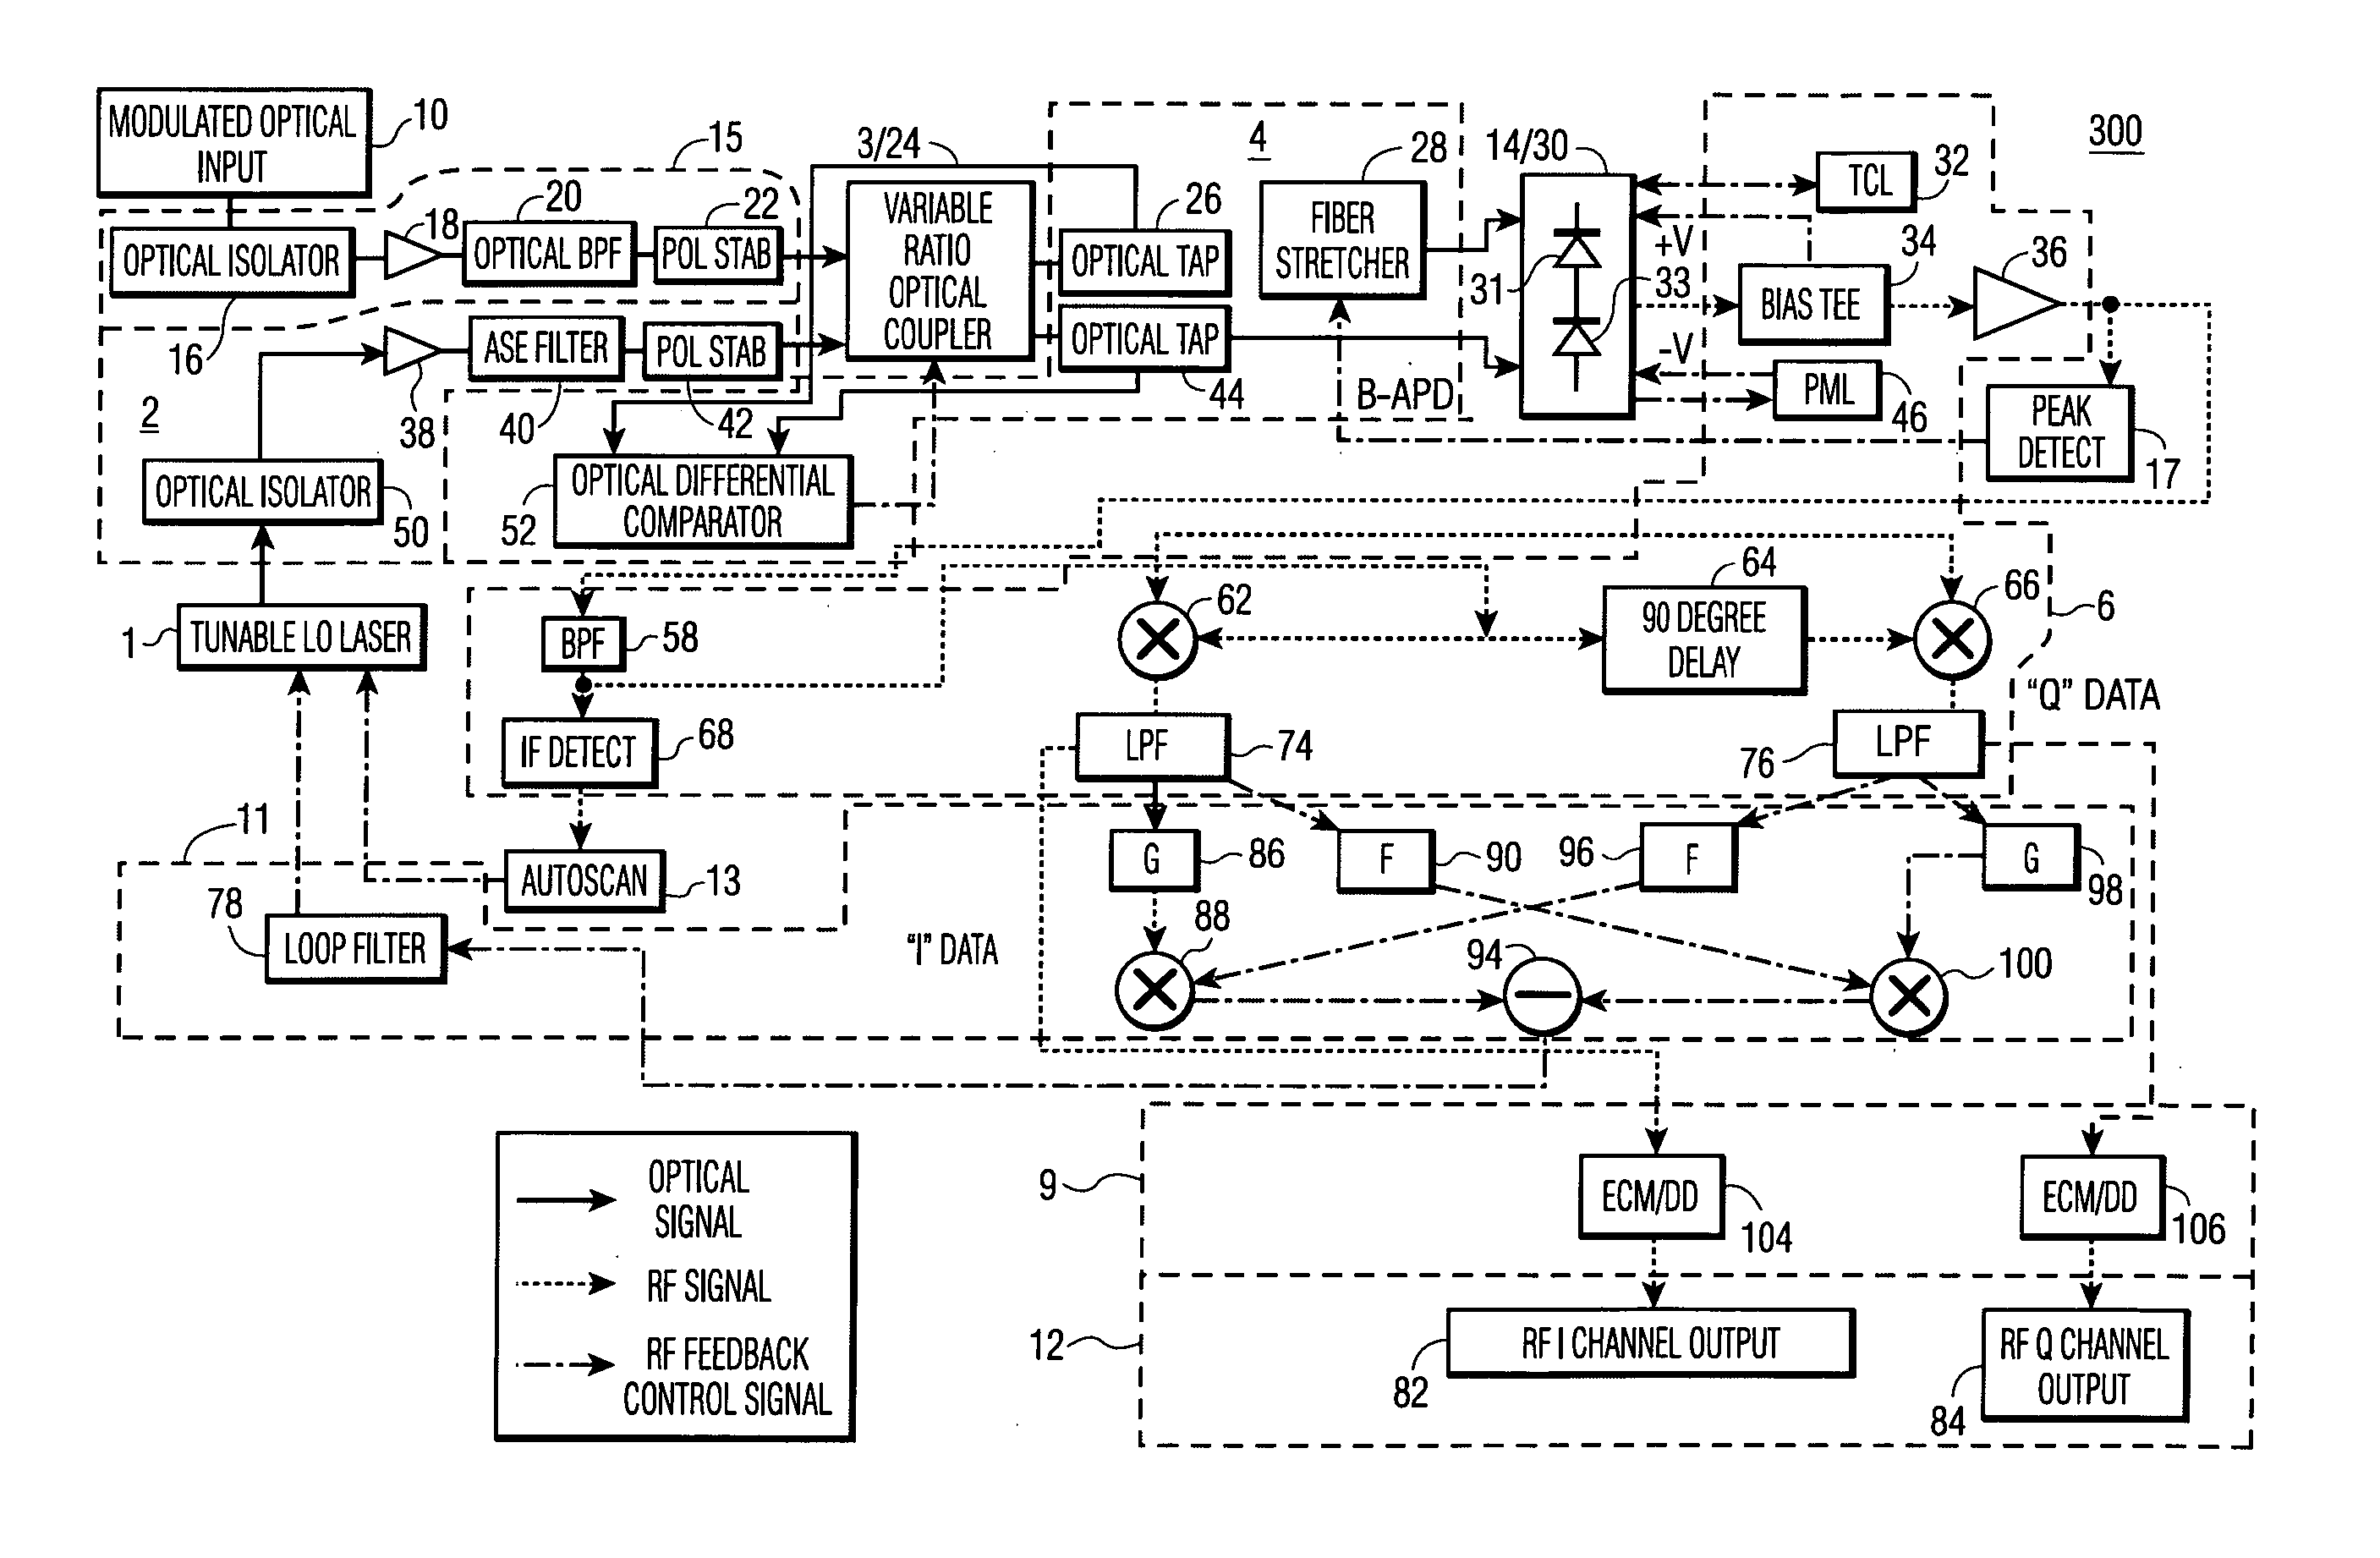 Feedback-controlled coherent optical receiver with electrical compensation/equalization